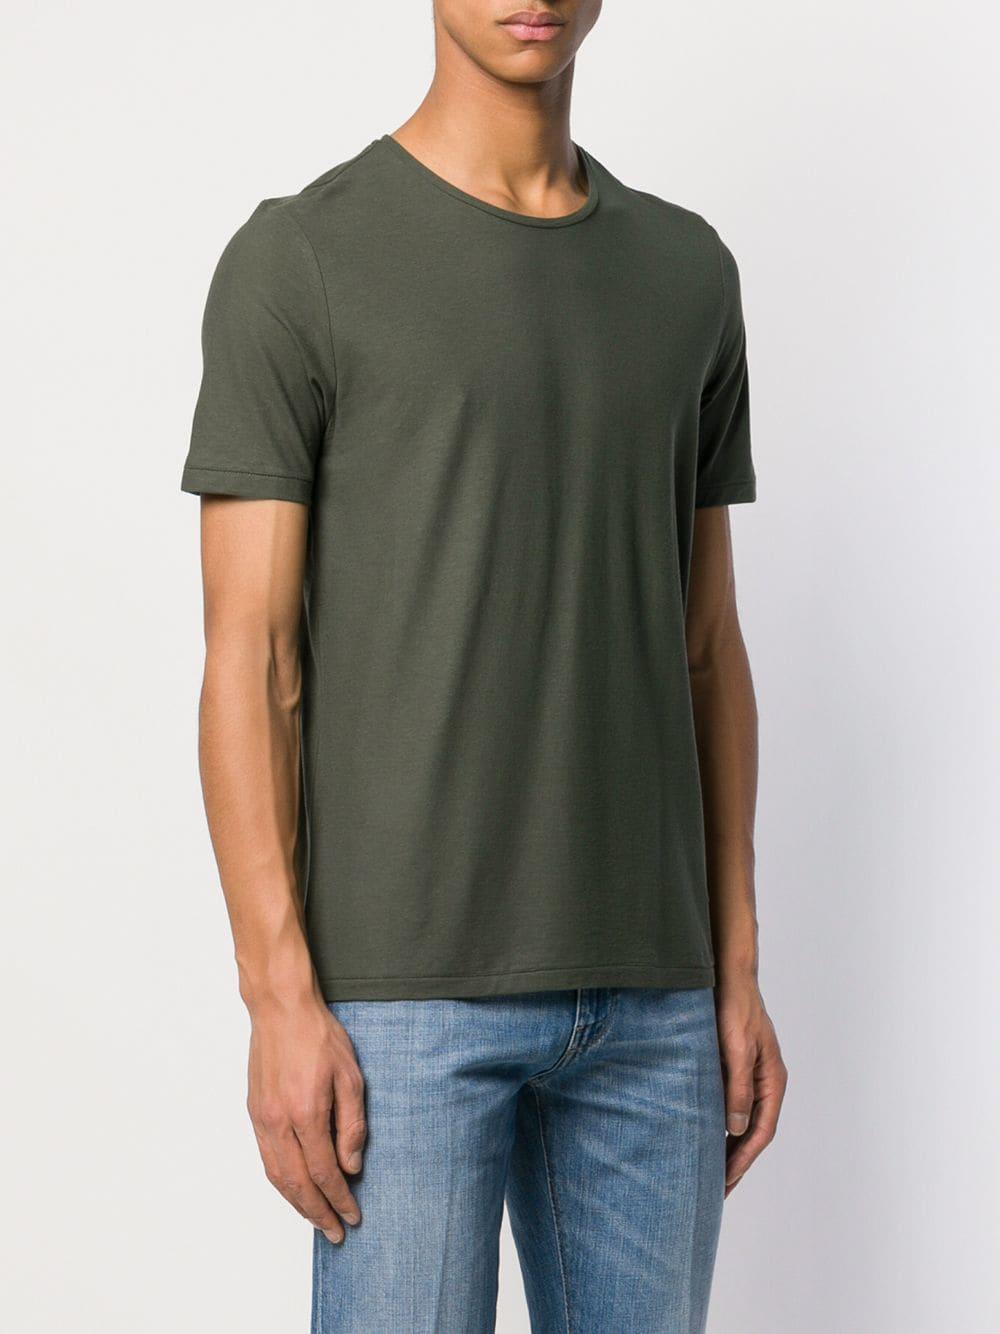 Roberto Collina Short-sleeve Fitted T-shirt in Green for Men - Lyst